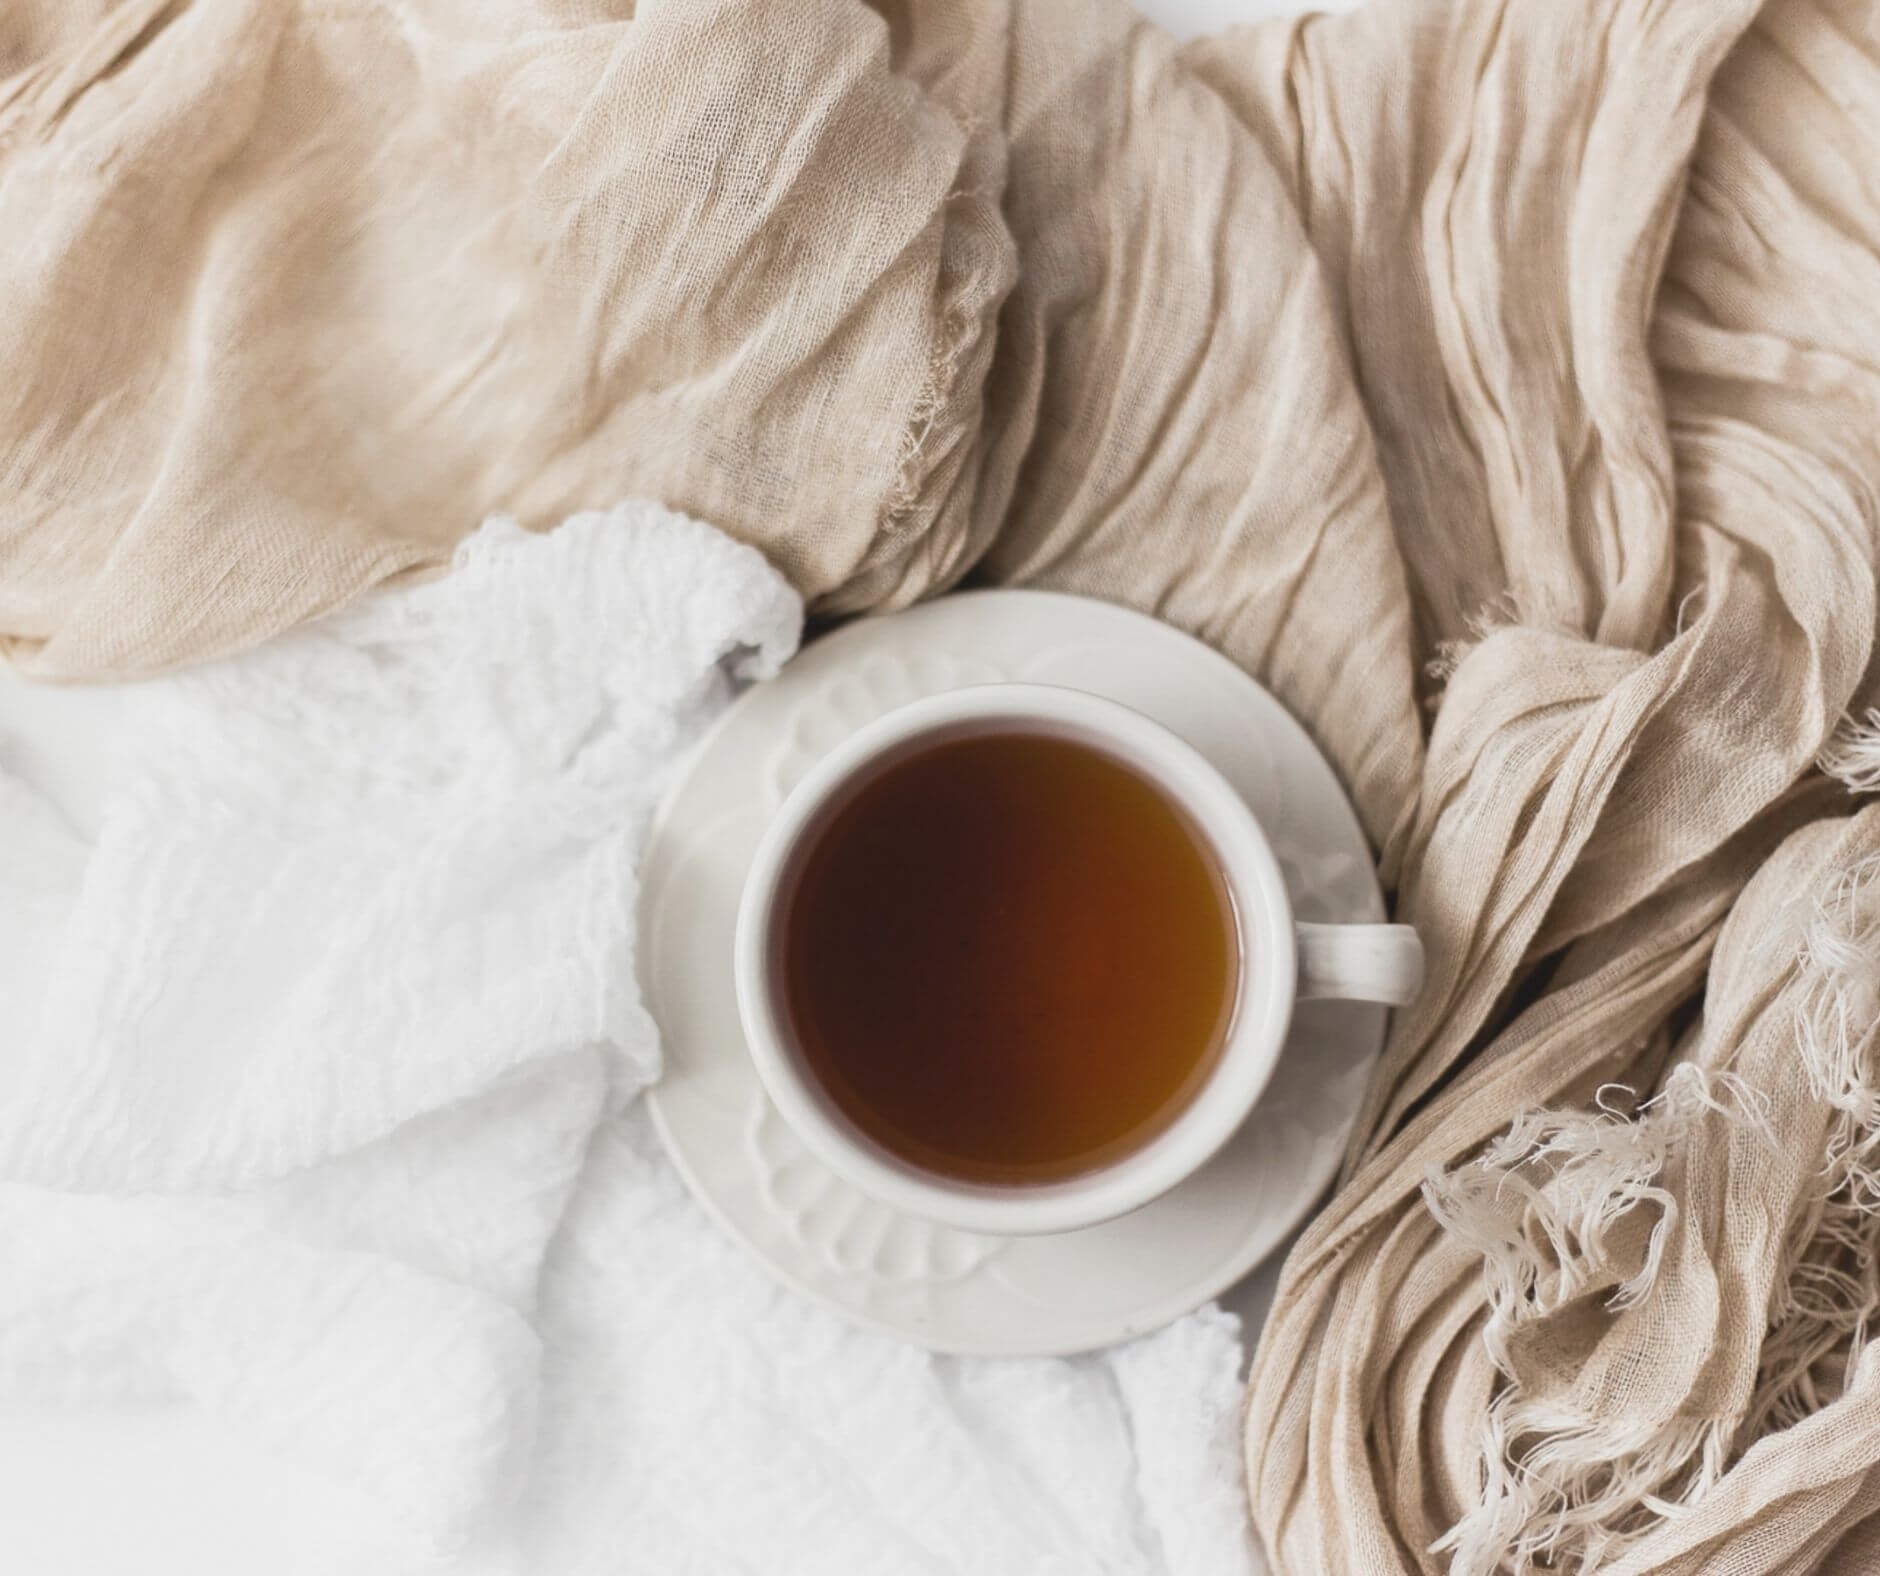 A cup of tea, featured on Elliot Olson's Portland, Oregon website strategy page, rests on a white surface with draped beige linens.